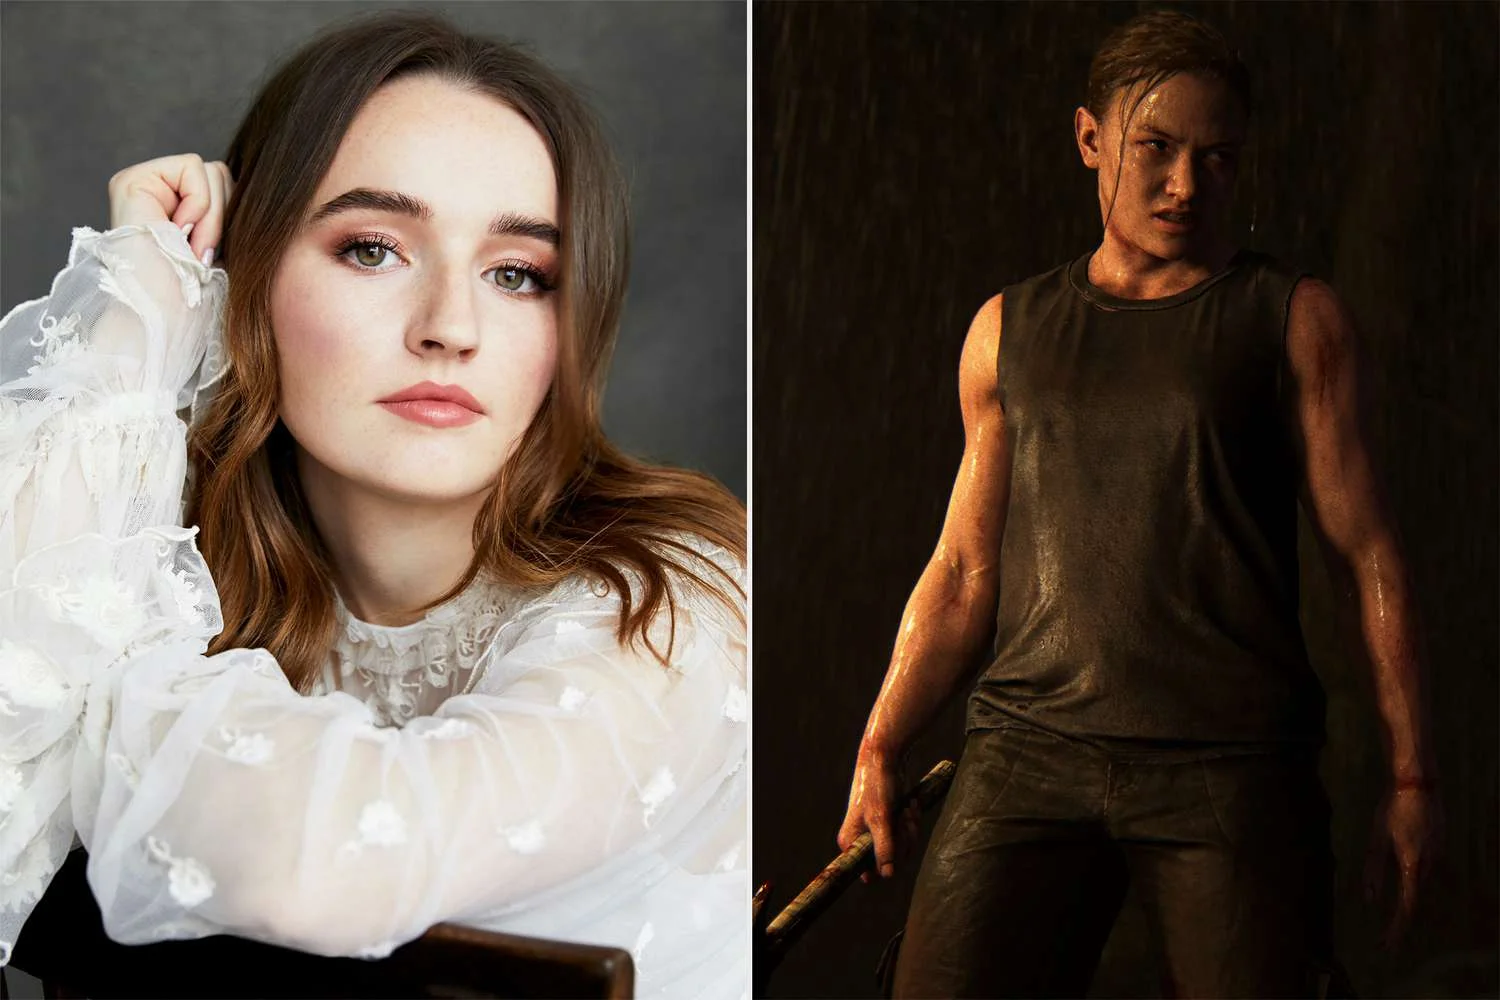 Actress chosen to play Abby in season two of The Last of Us